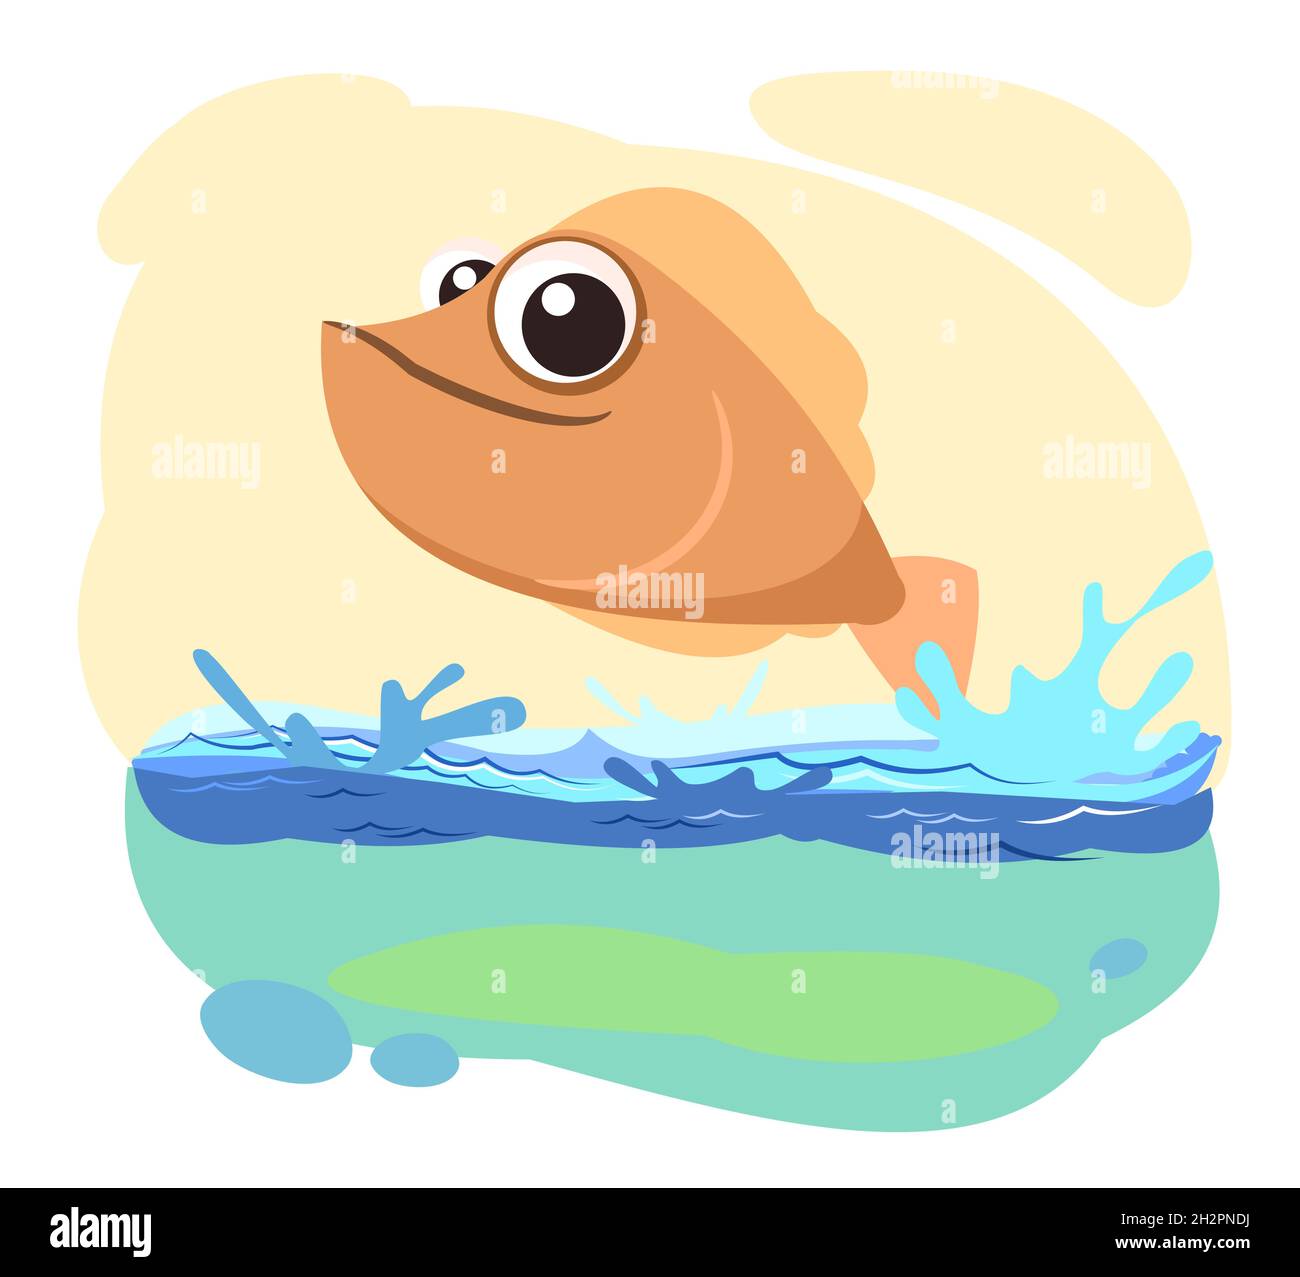 Tropical fish. Landscape. Underwater life. Wild animals. Ocean, sea. Summer water. Isolated on white background. Illustration in cartoon style. Flat Stock Vector